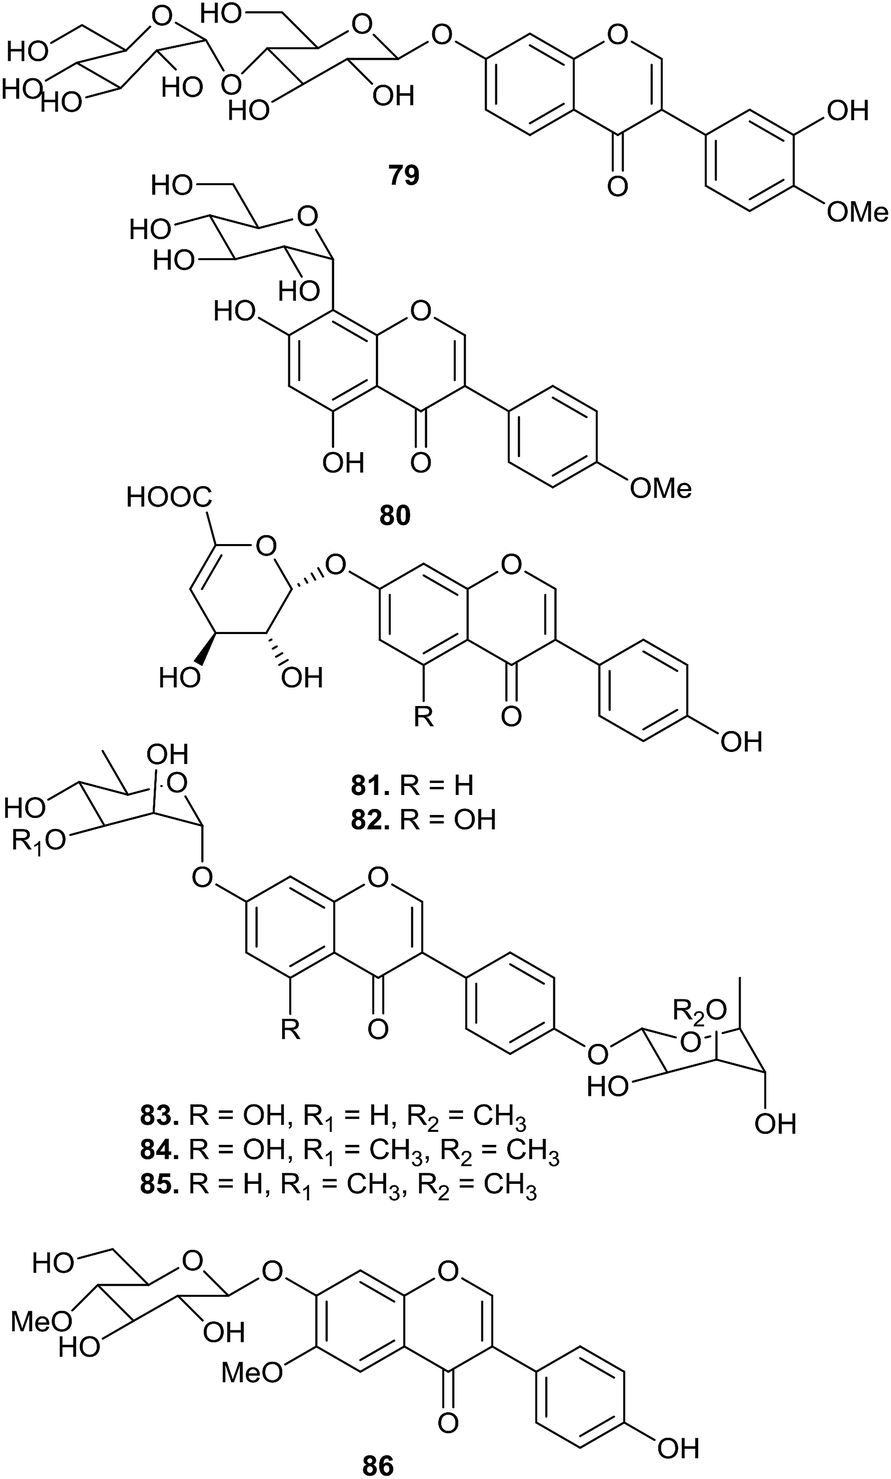 Isolation Of Naturally Occurring Novel Isoflavonoids An Update Natural Product Reports Rsc Publishing Doi 10 1039 C8npg